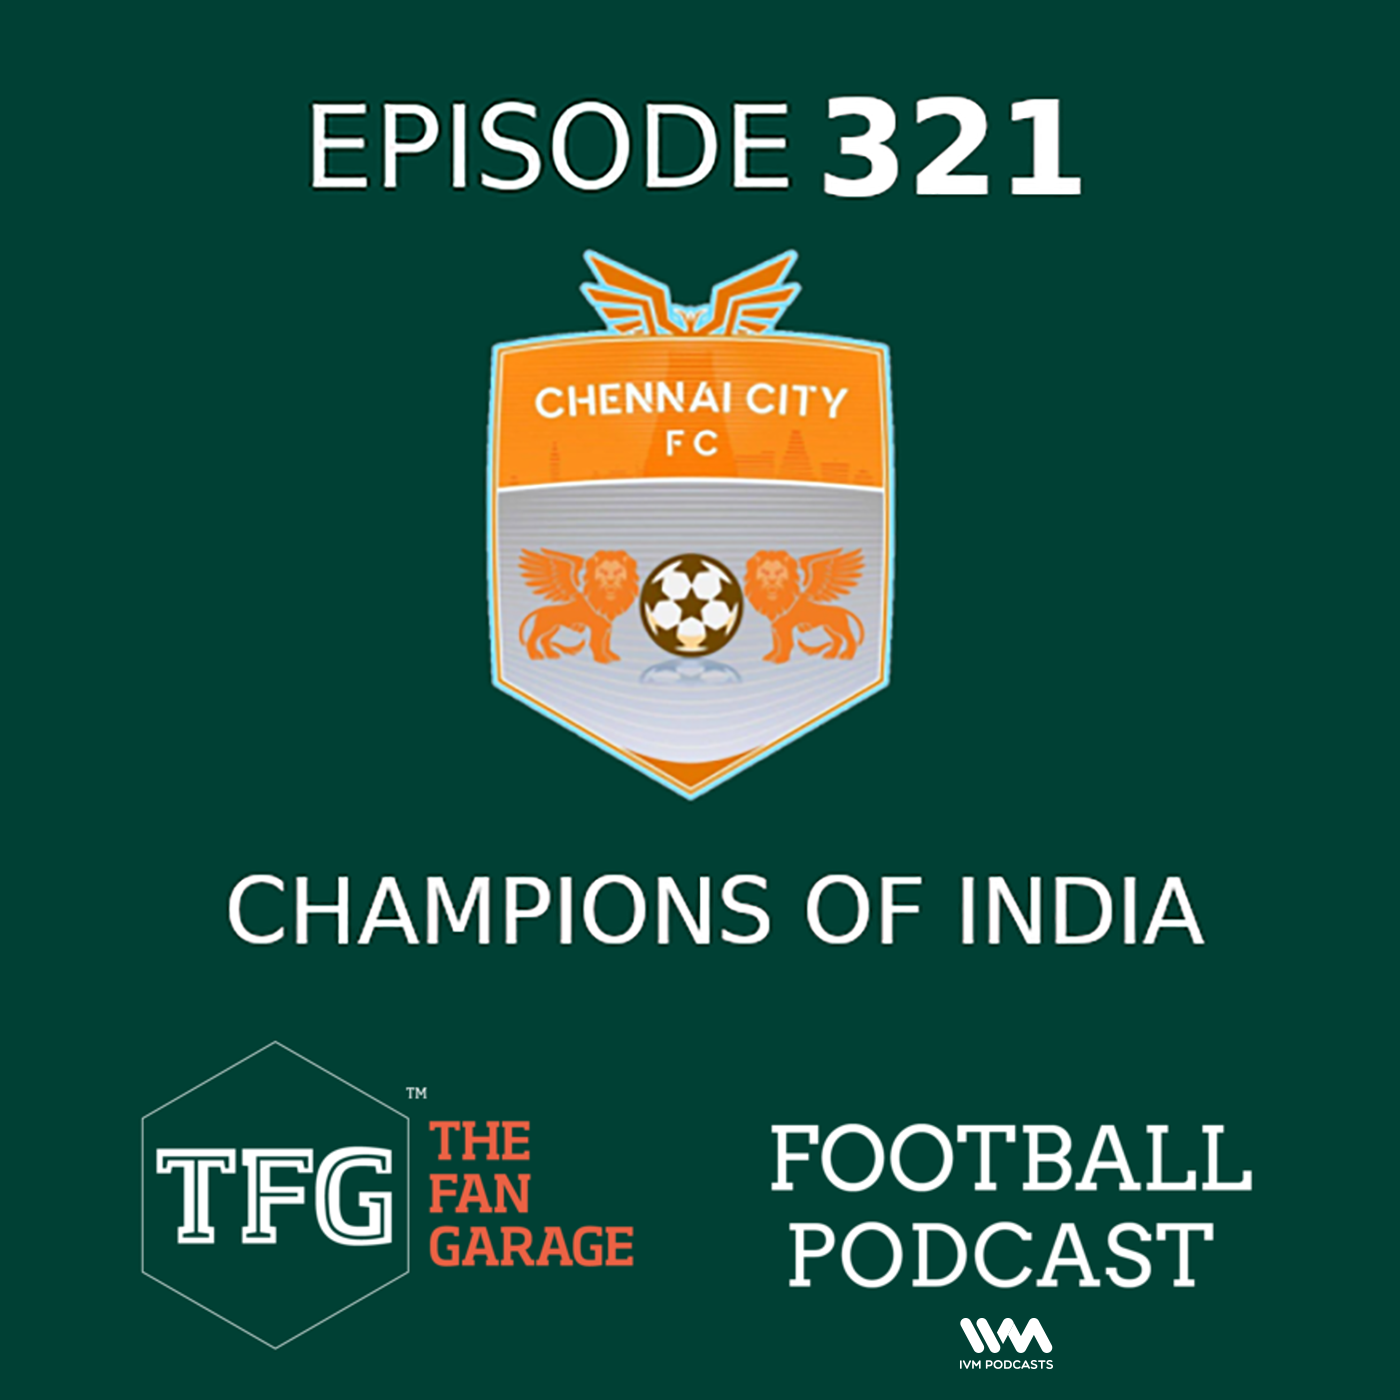 TFG Indian Football Ep. 321: Chennai City FC win I-League, Become Champions of India